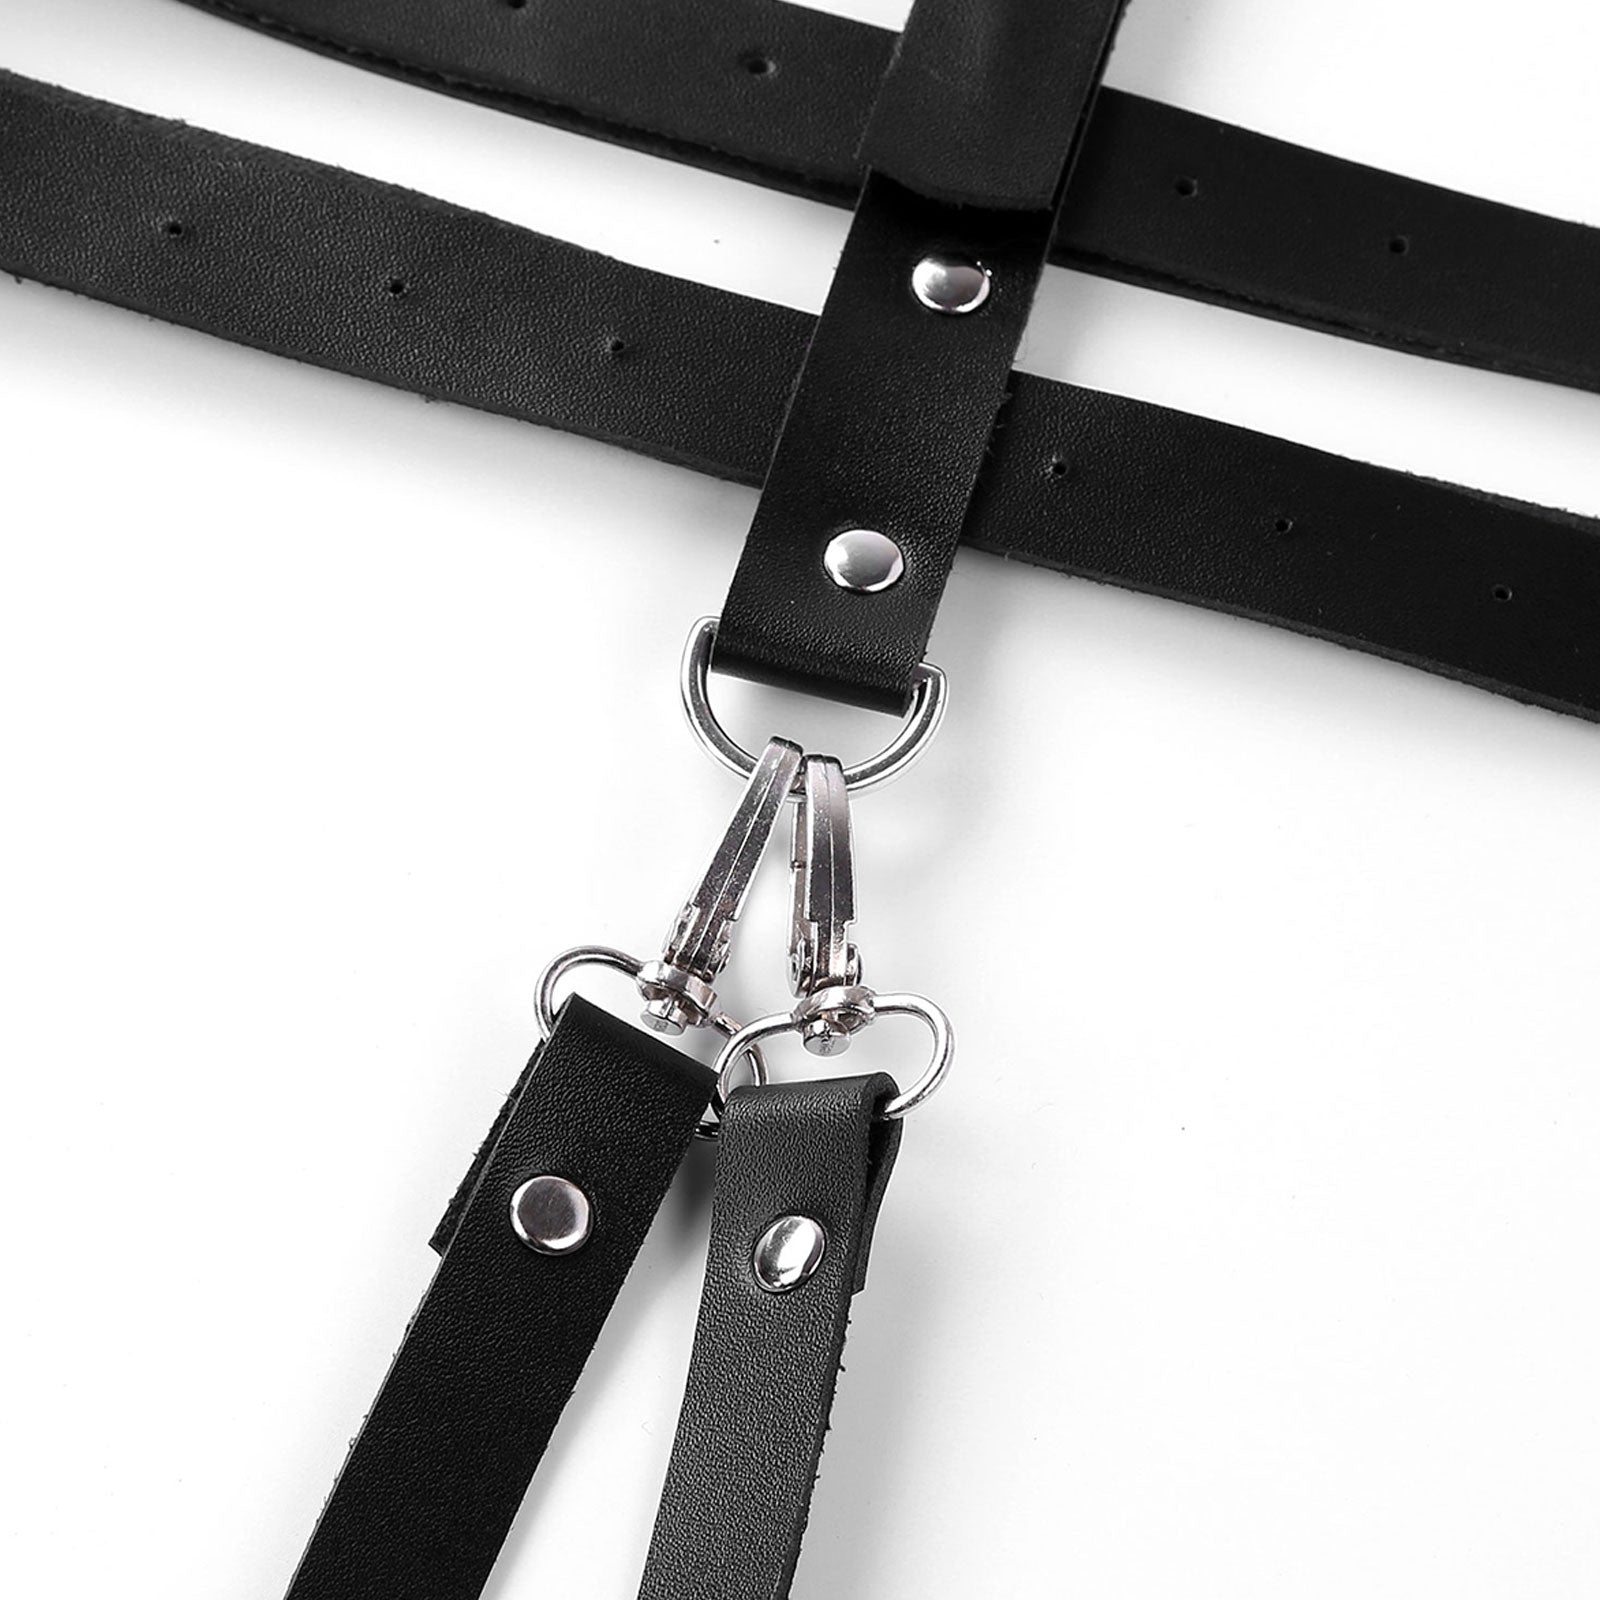 Male Body Harness / Faux Leather Body Chest Harness Costumes with O-rings Buttons / Gothic Bondage - HARD'N'HEAVY